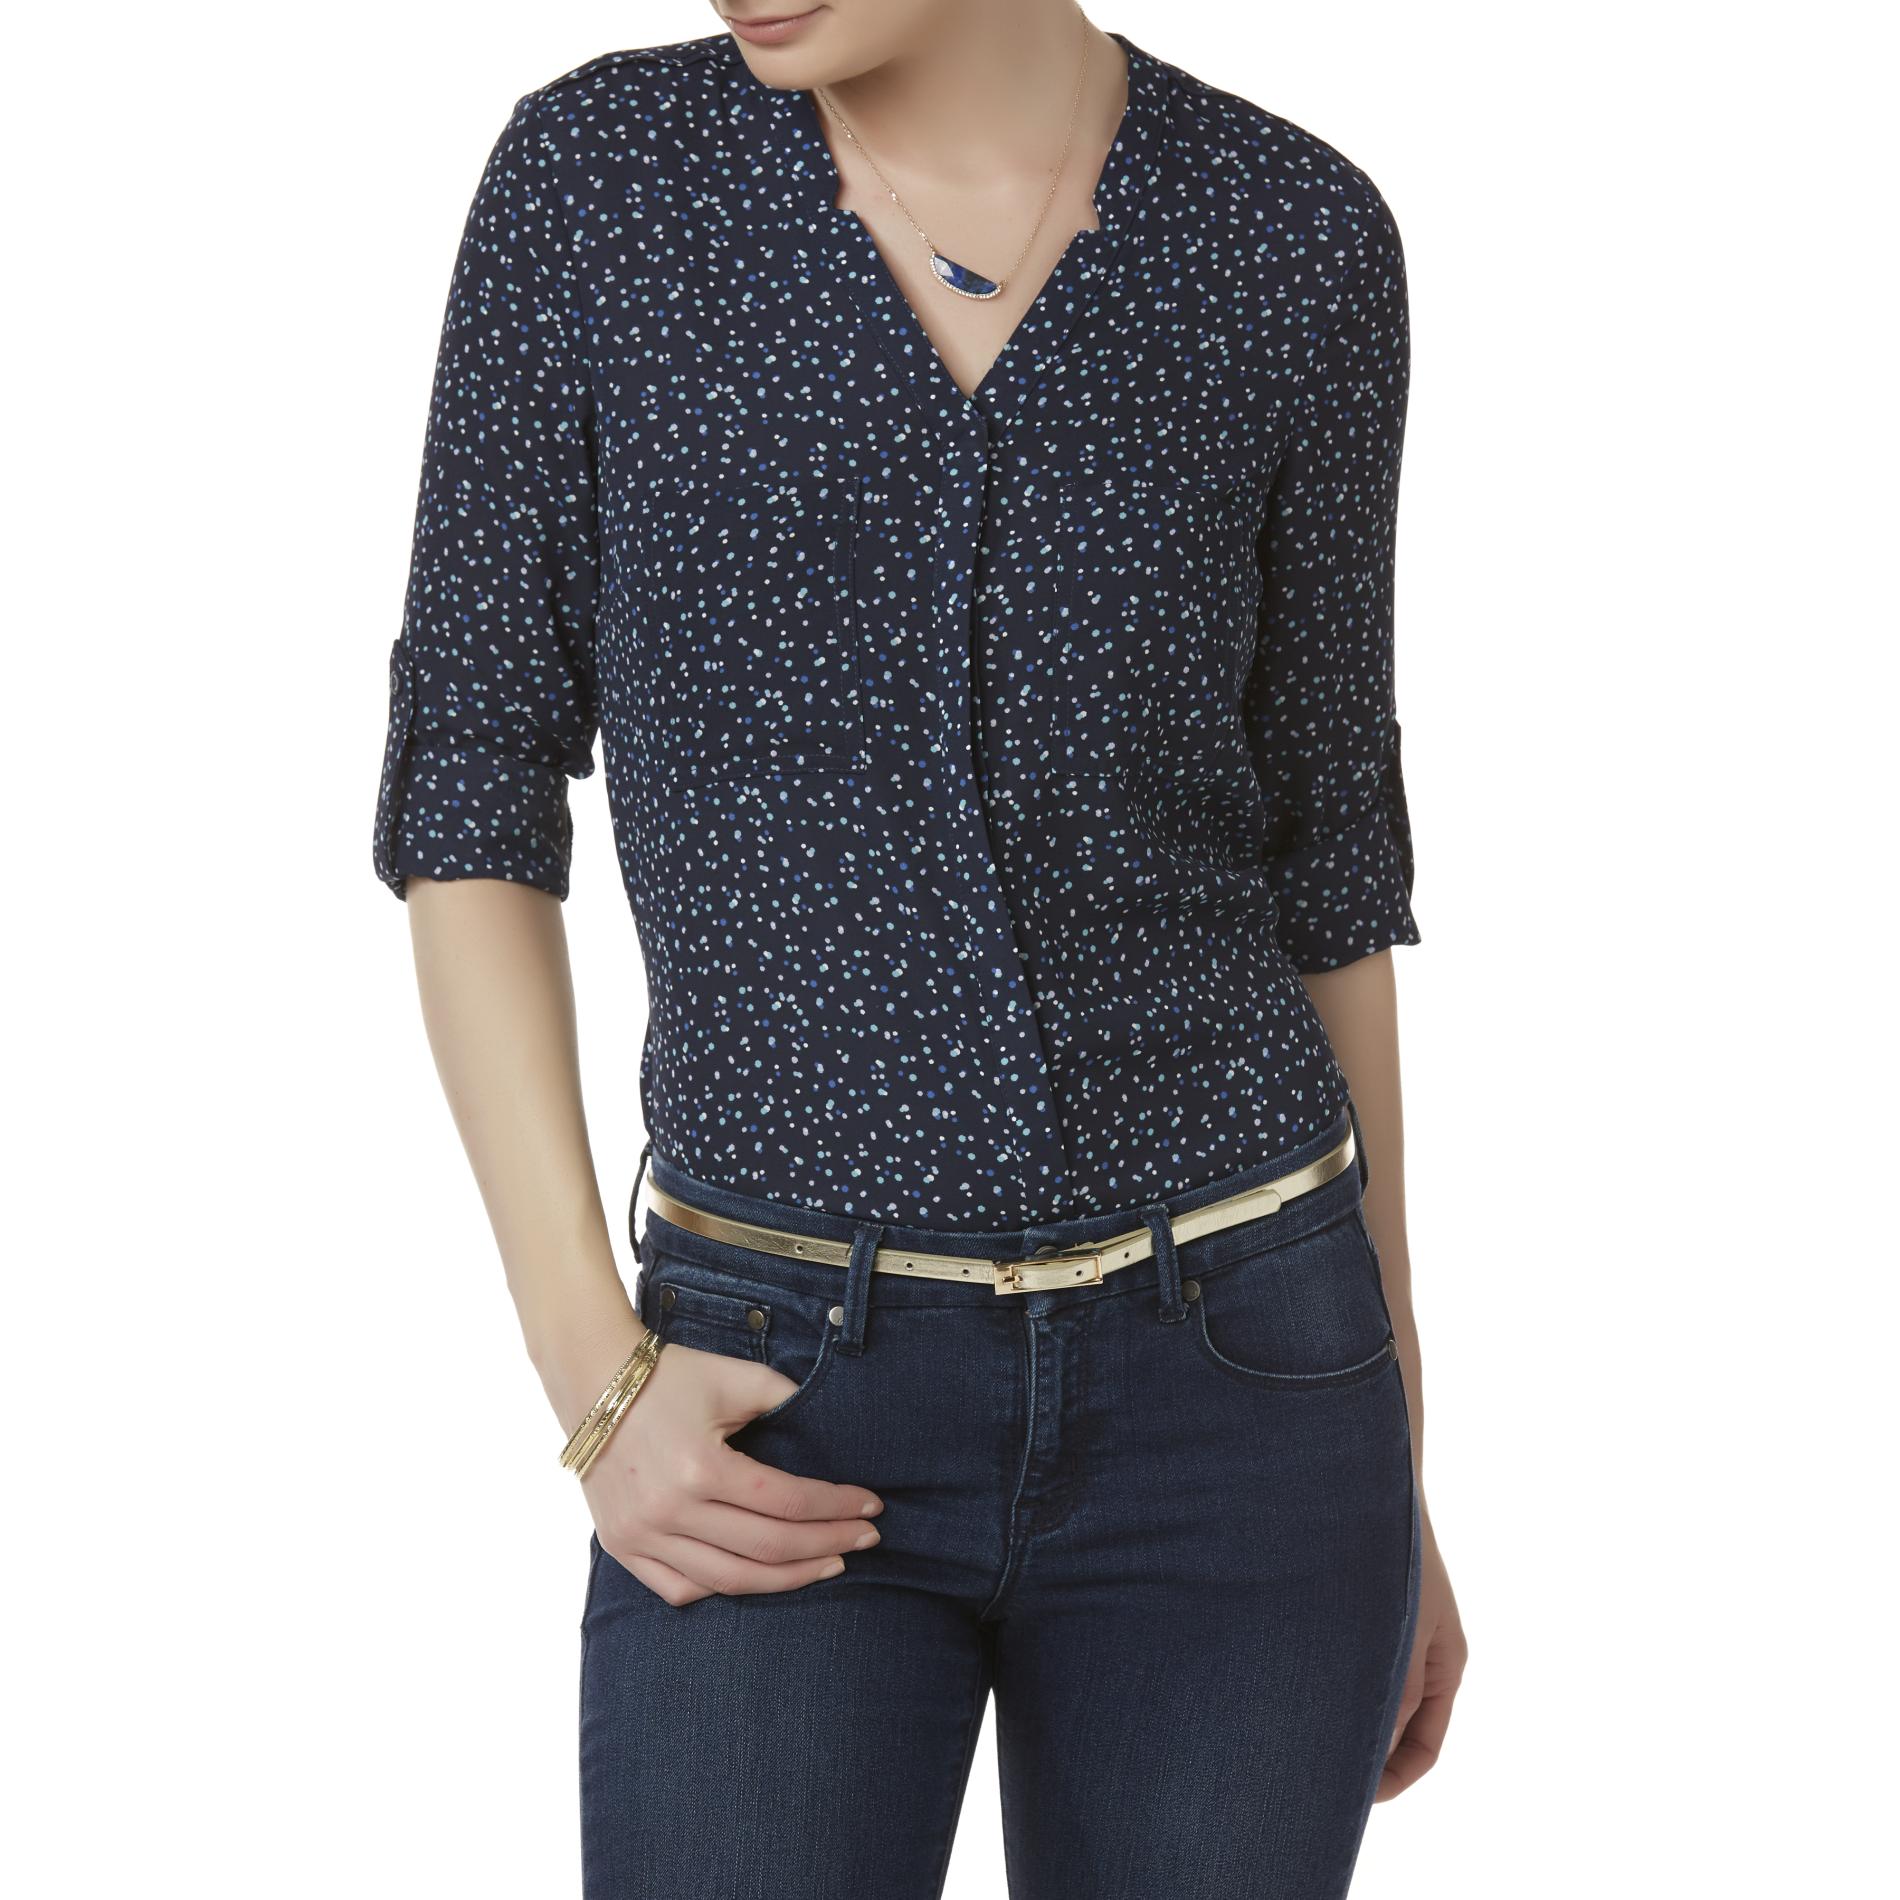 Simply Styled Women's Utility Blouse - Dot